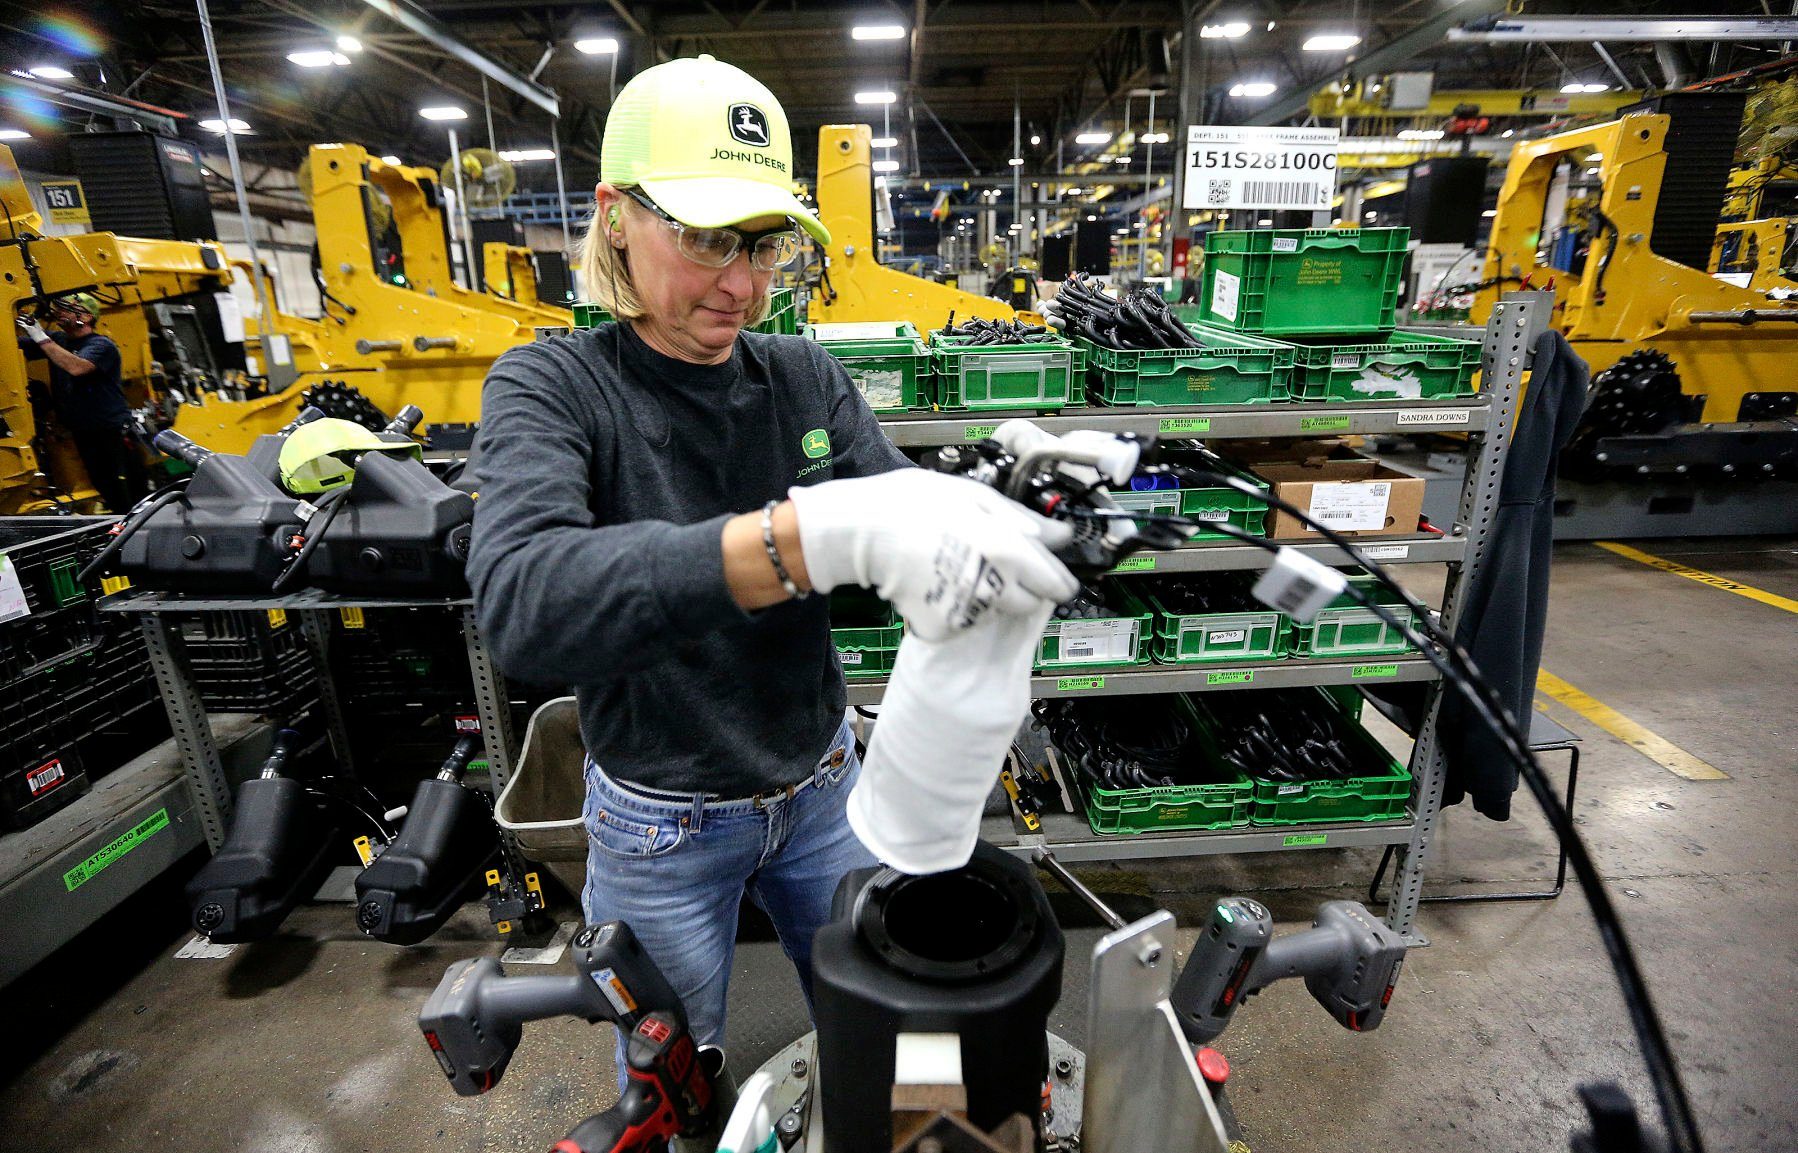 John Deere Dubuque Works employee Sandra Downs works on assembling fuel, hydraulics, and DEF (Diesel Exhaust Fluid) tanks on Friday, Oct. 7, 2022.    PHOTO CREDIT: Dave Kettering